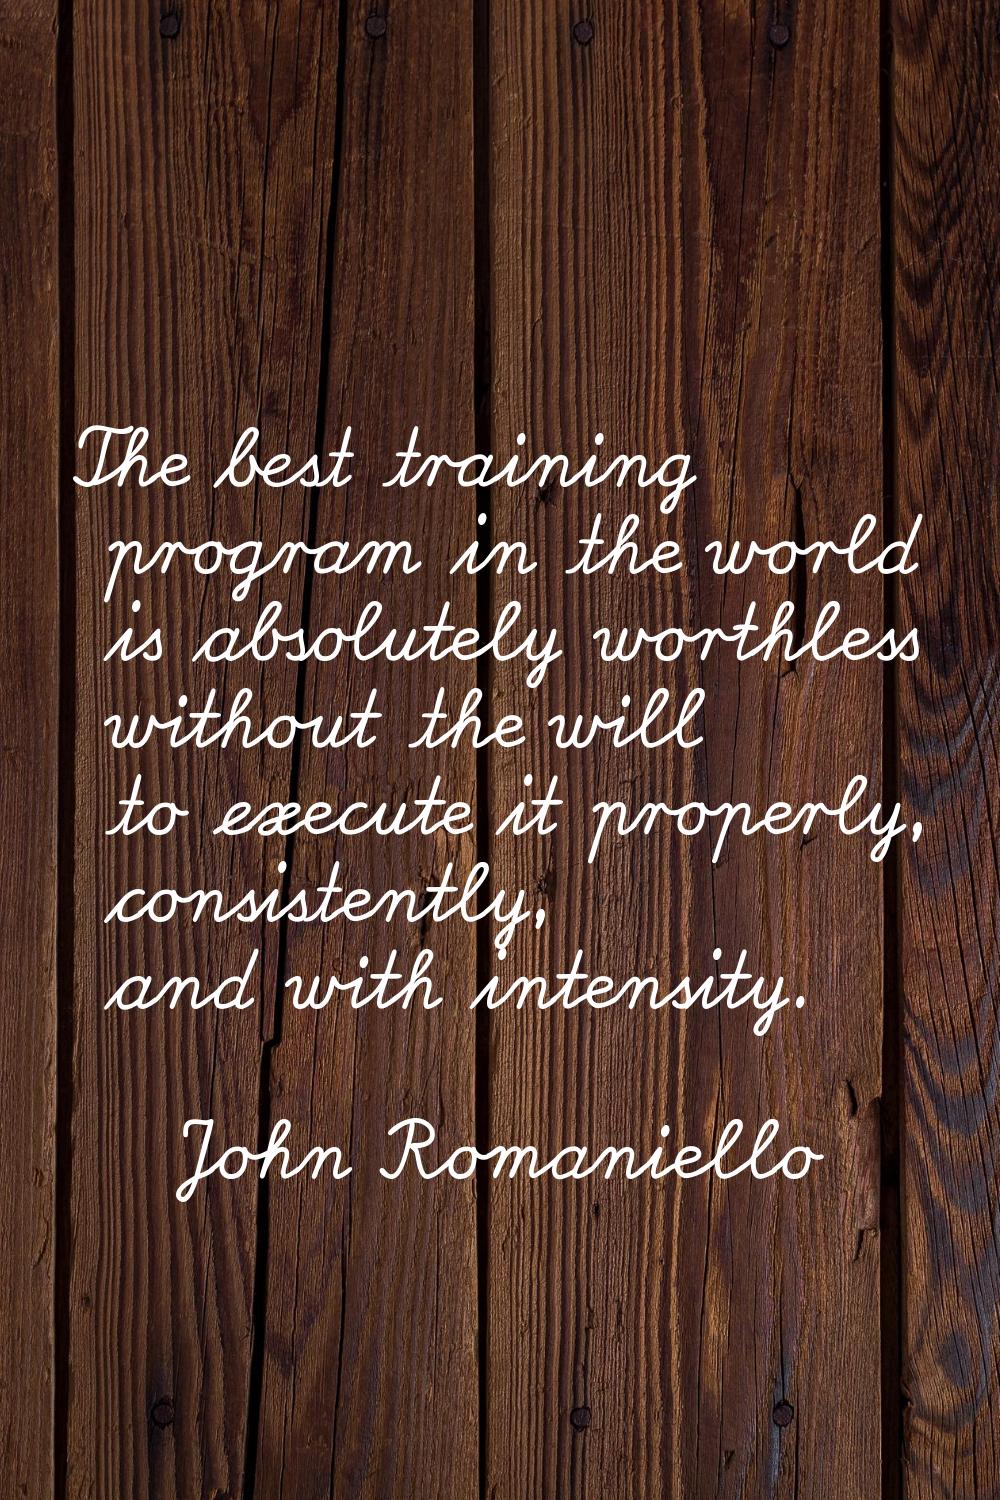 The best training program in the world is absolutely worthless without the will to execute it prope